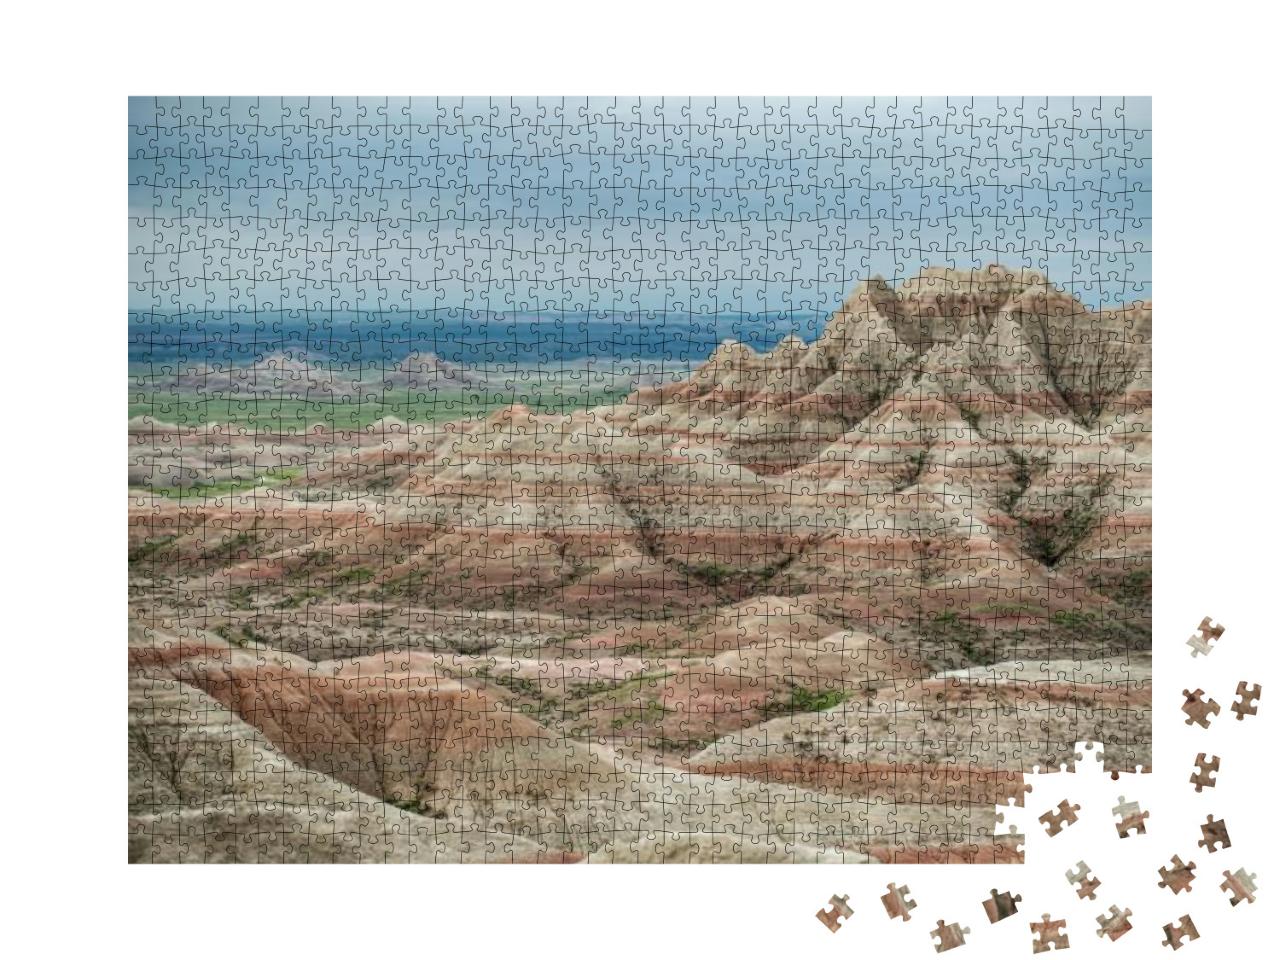 Layered Hills in the Badlands National Park... Jigsaw Puzzle with 1000 pieces